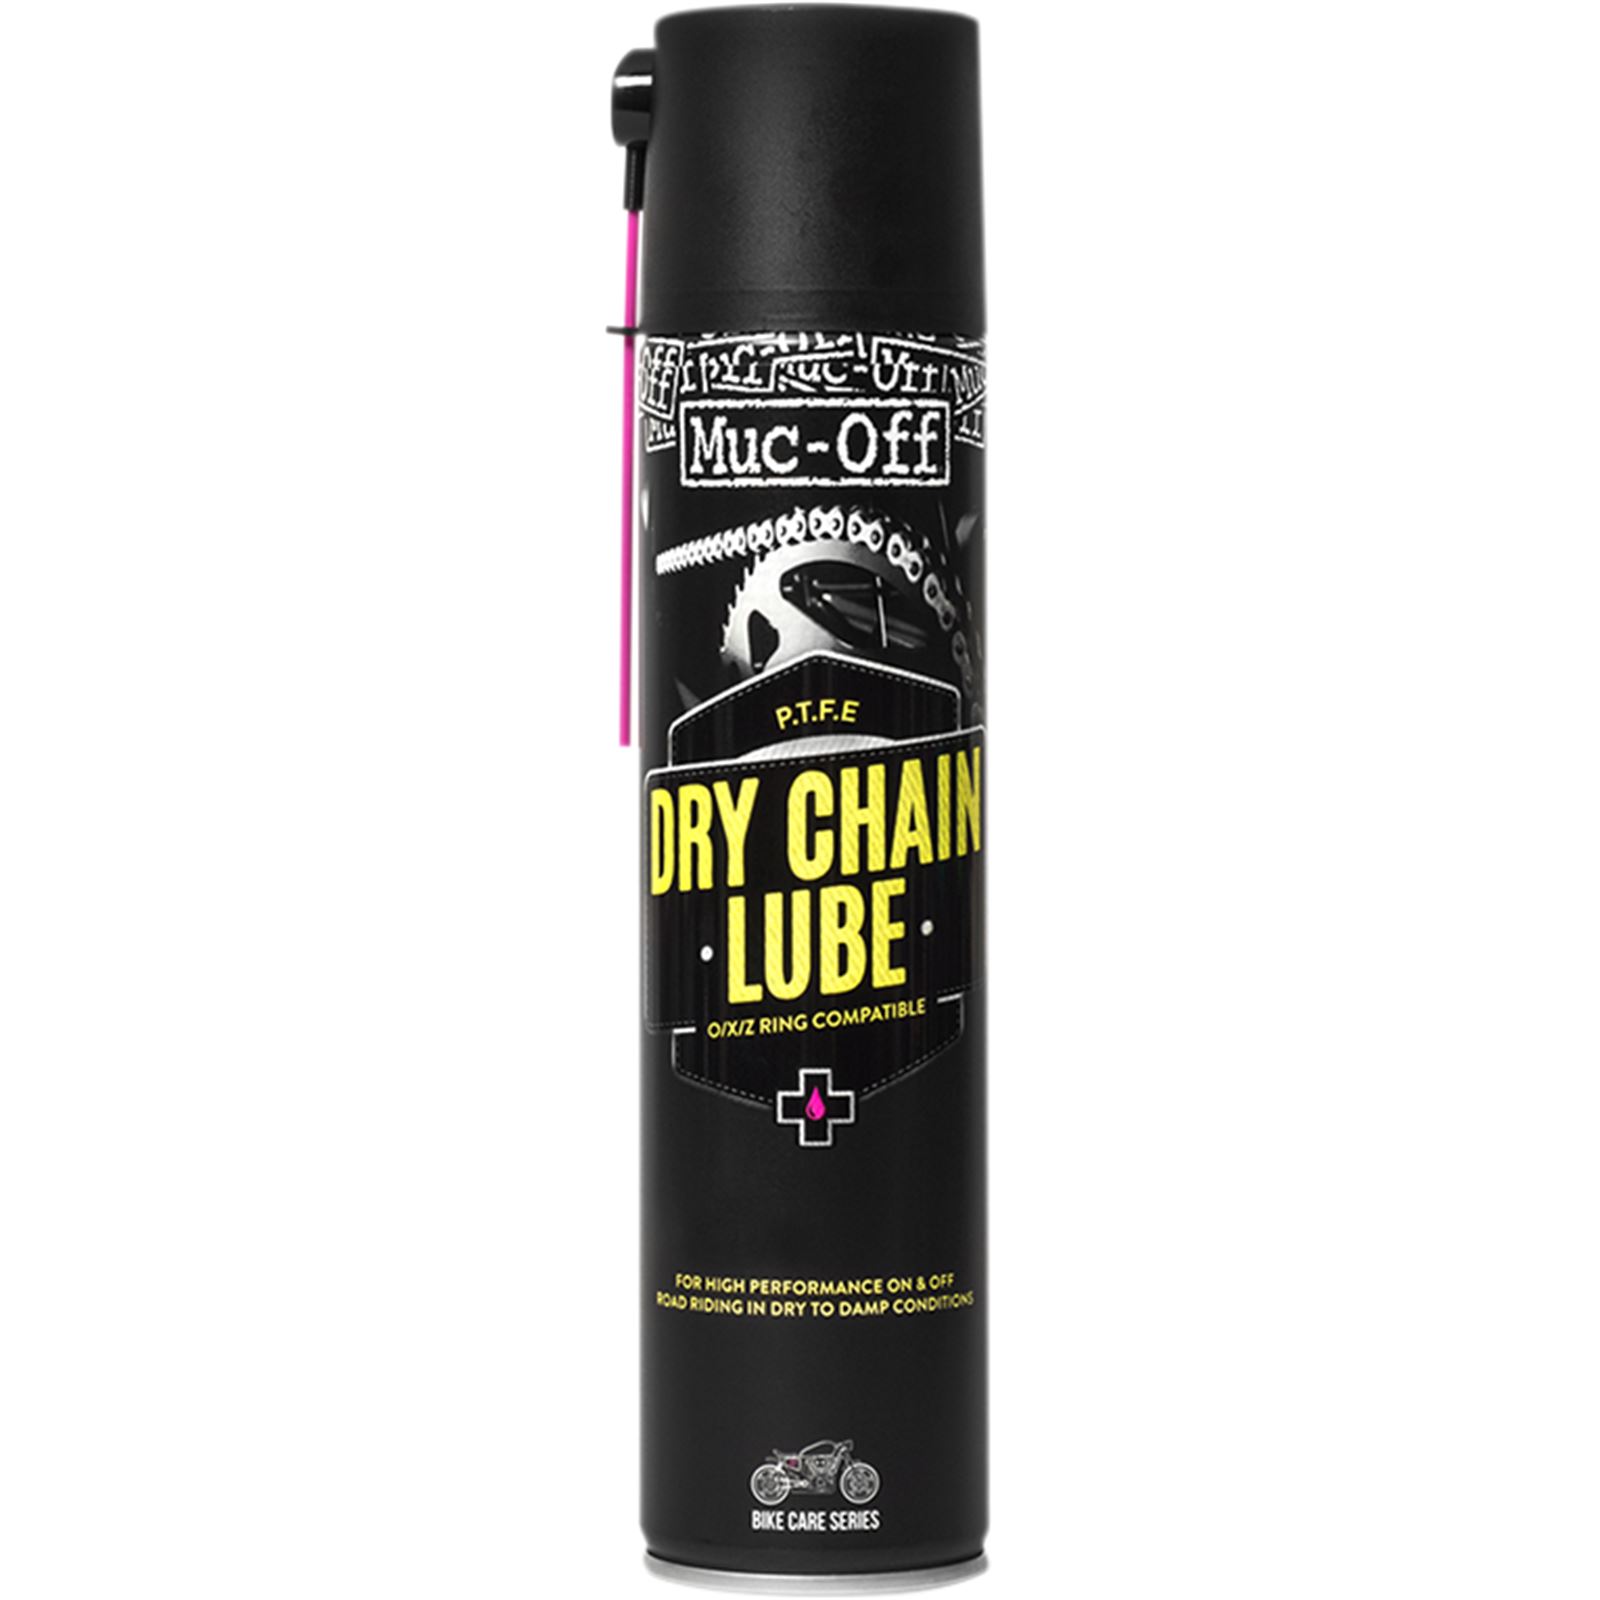 Muc Off Dry Ptfe Chain Lube 400ml Is At Motomentum At A Great Price See Our Free Shipping Rewards Points Motorcycle Atv Utv Powersports Parts The Best